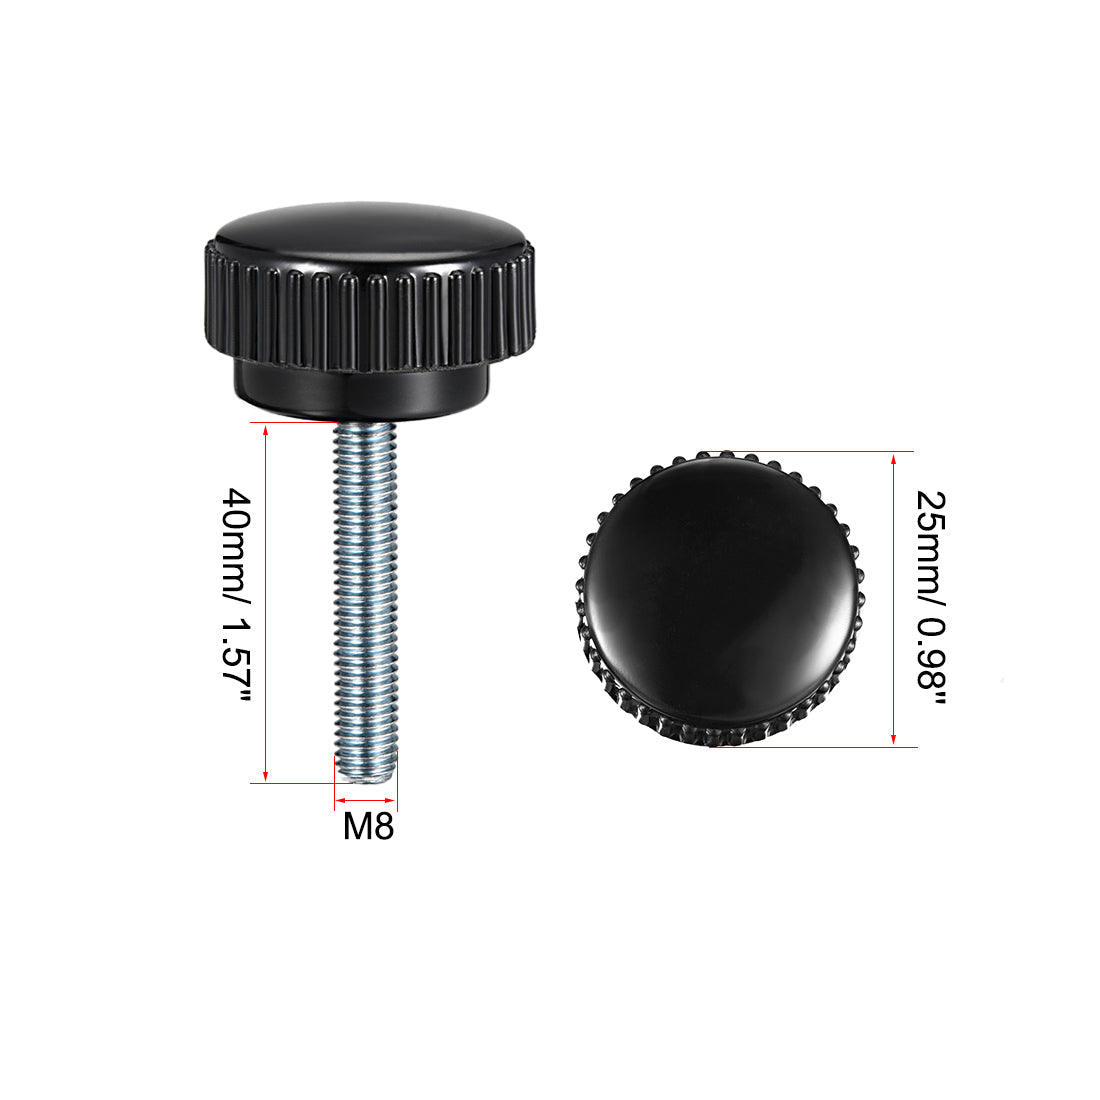 Uxcell Uxcell M6 x 35mm Male Thread Knurled Clamping Knobs Grip Thumb Screw on Type  2 Pcs